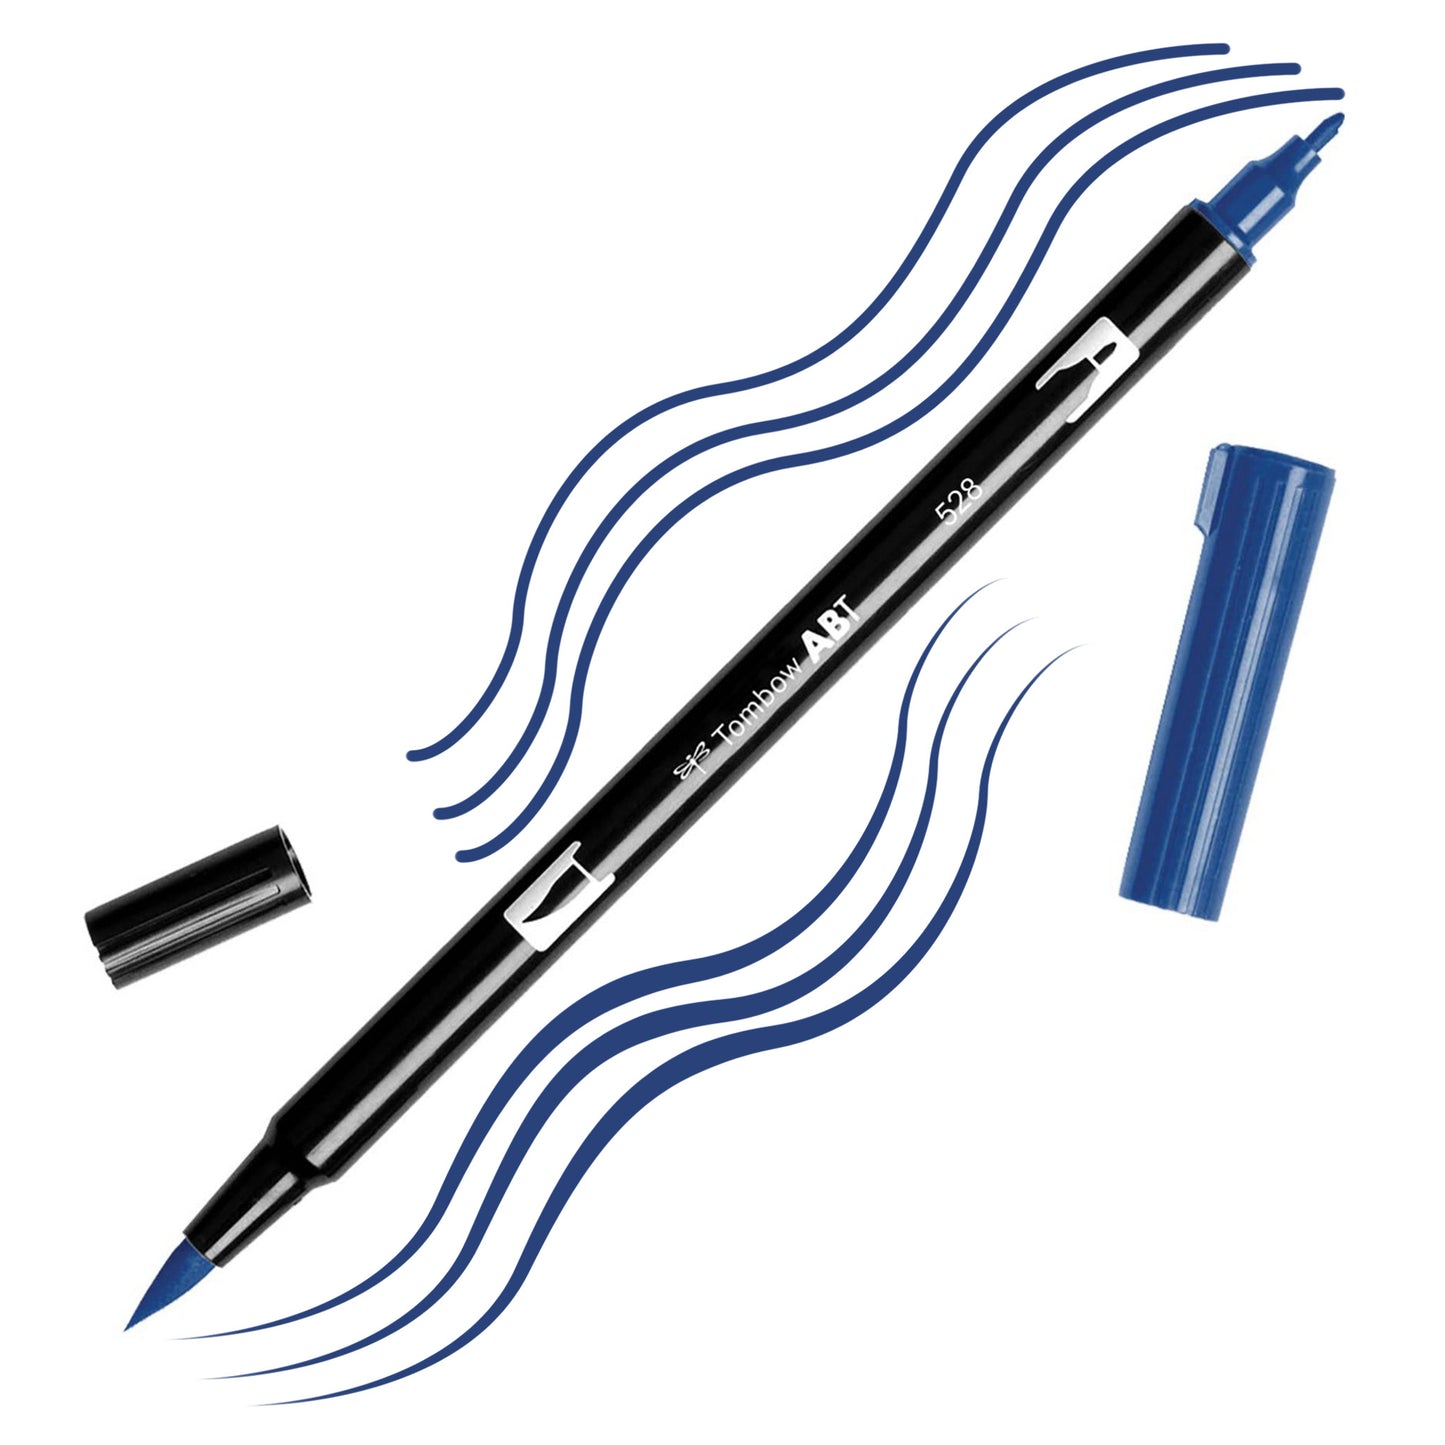 Navy Blue Tombow double-headed brush-pen with a flexible nylon fiber brush tip and a fine tip against a white background with Navy Blue strokes